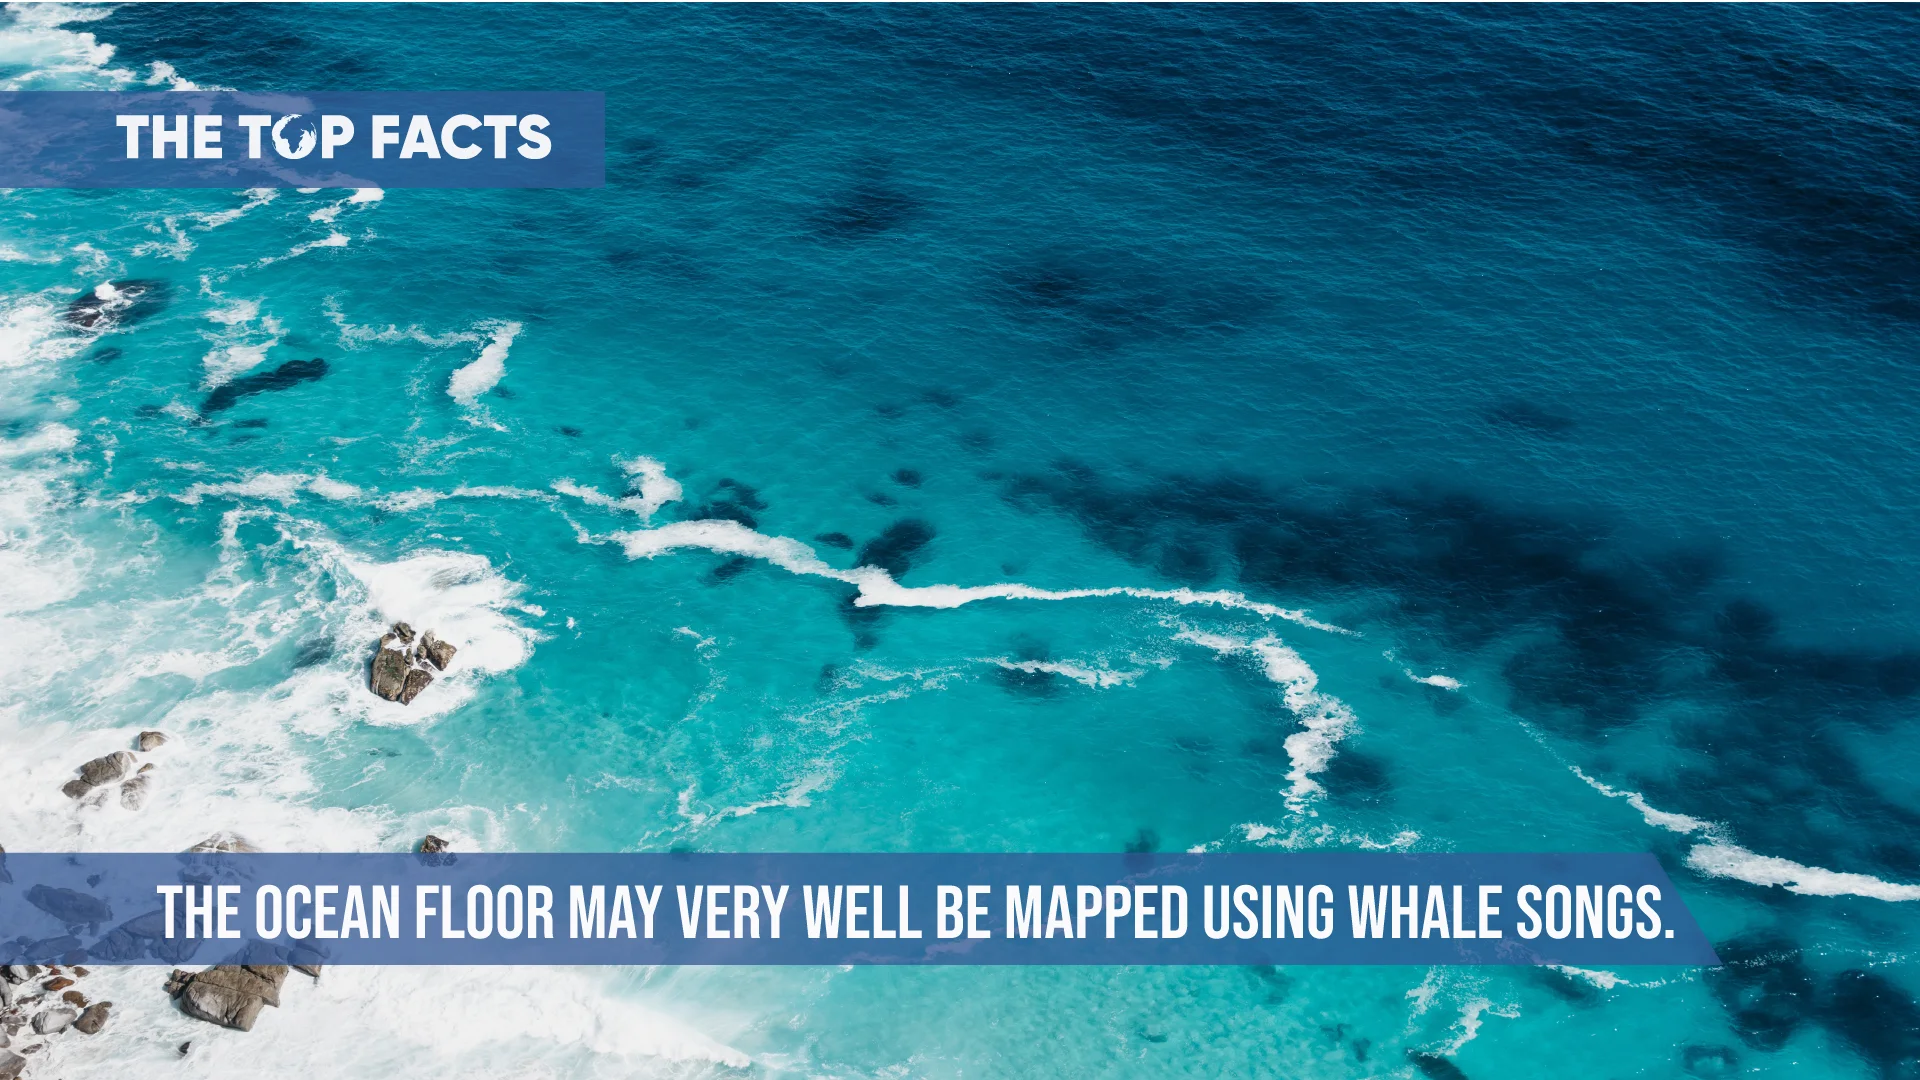 The Ocean Floor May Very Well Be Mapped Using Whale Songs